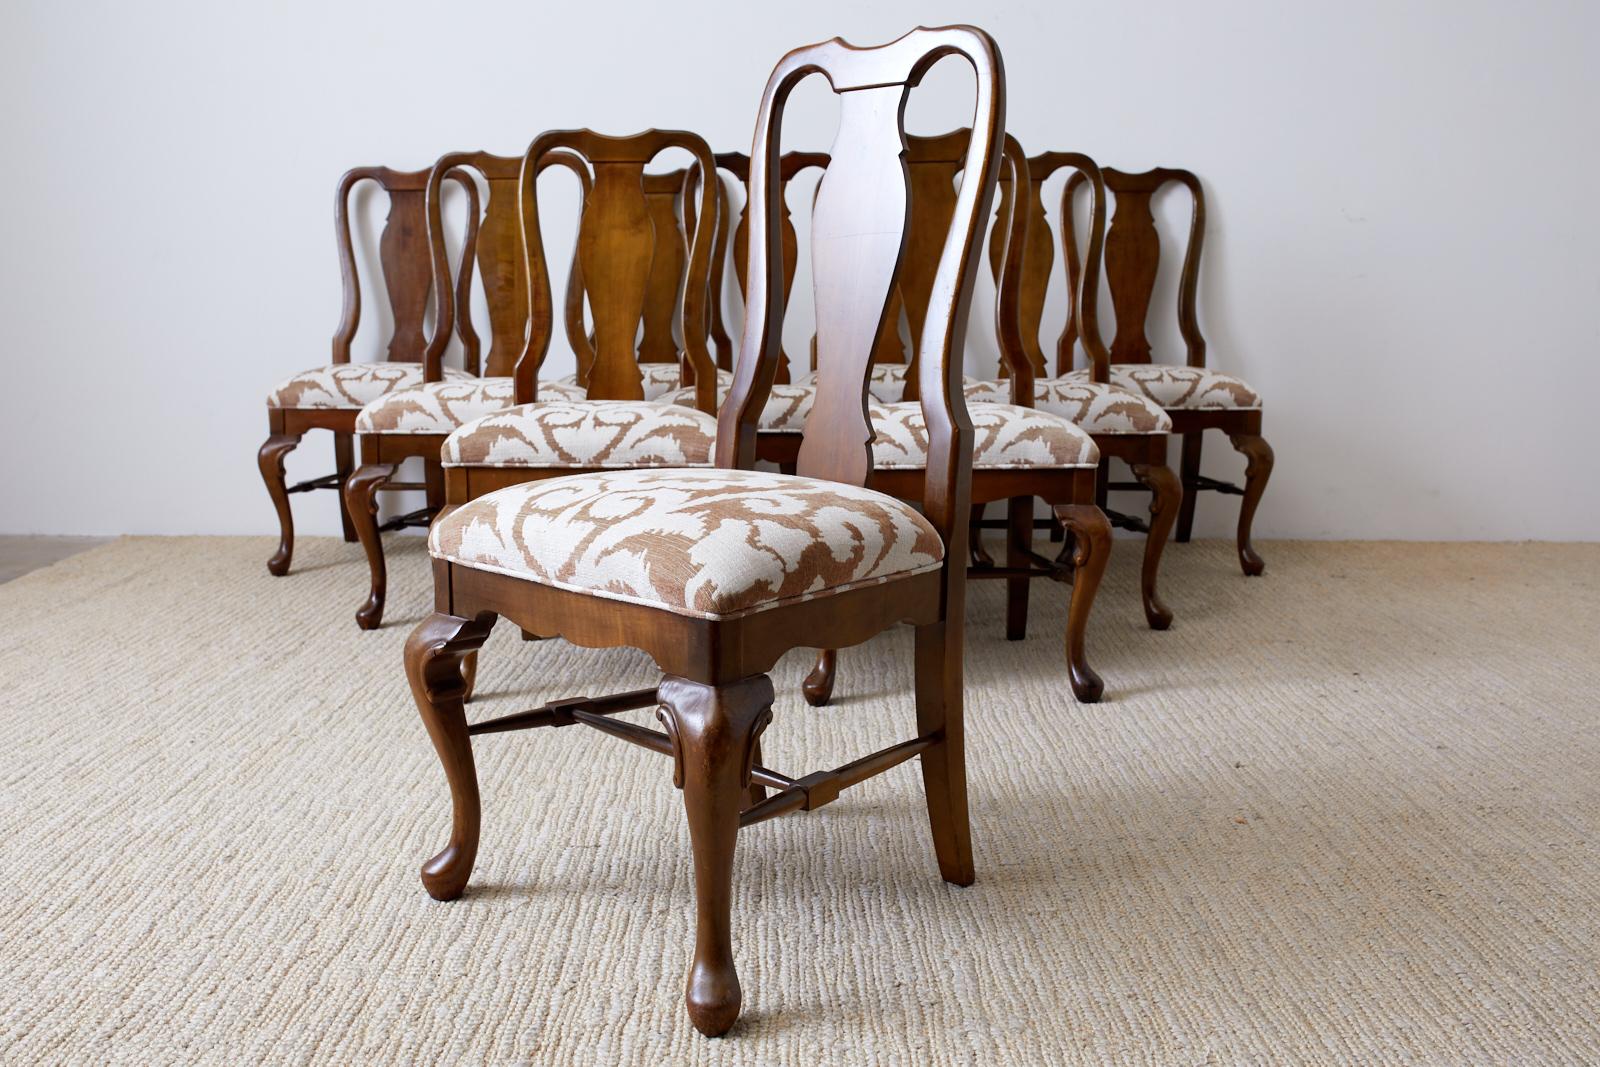 queen anne style chairs for sale